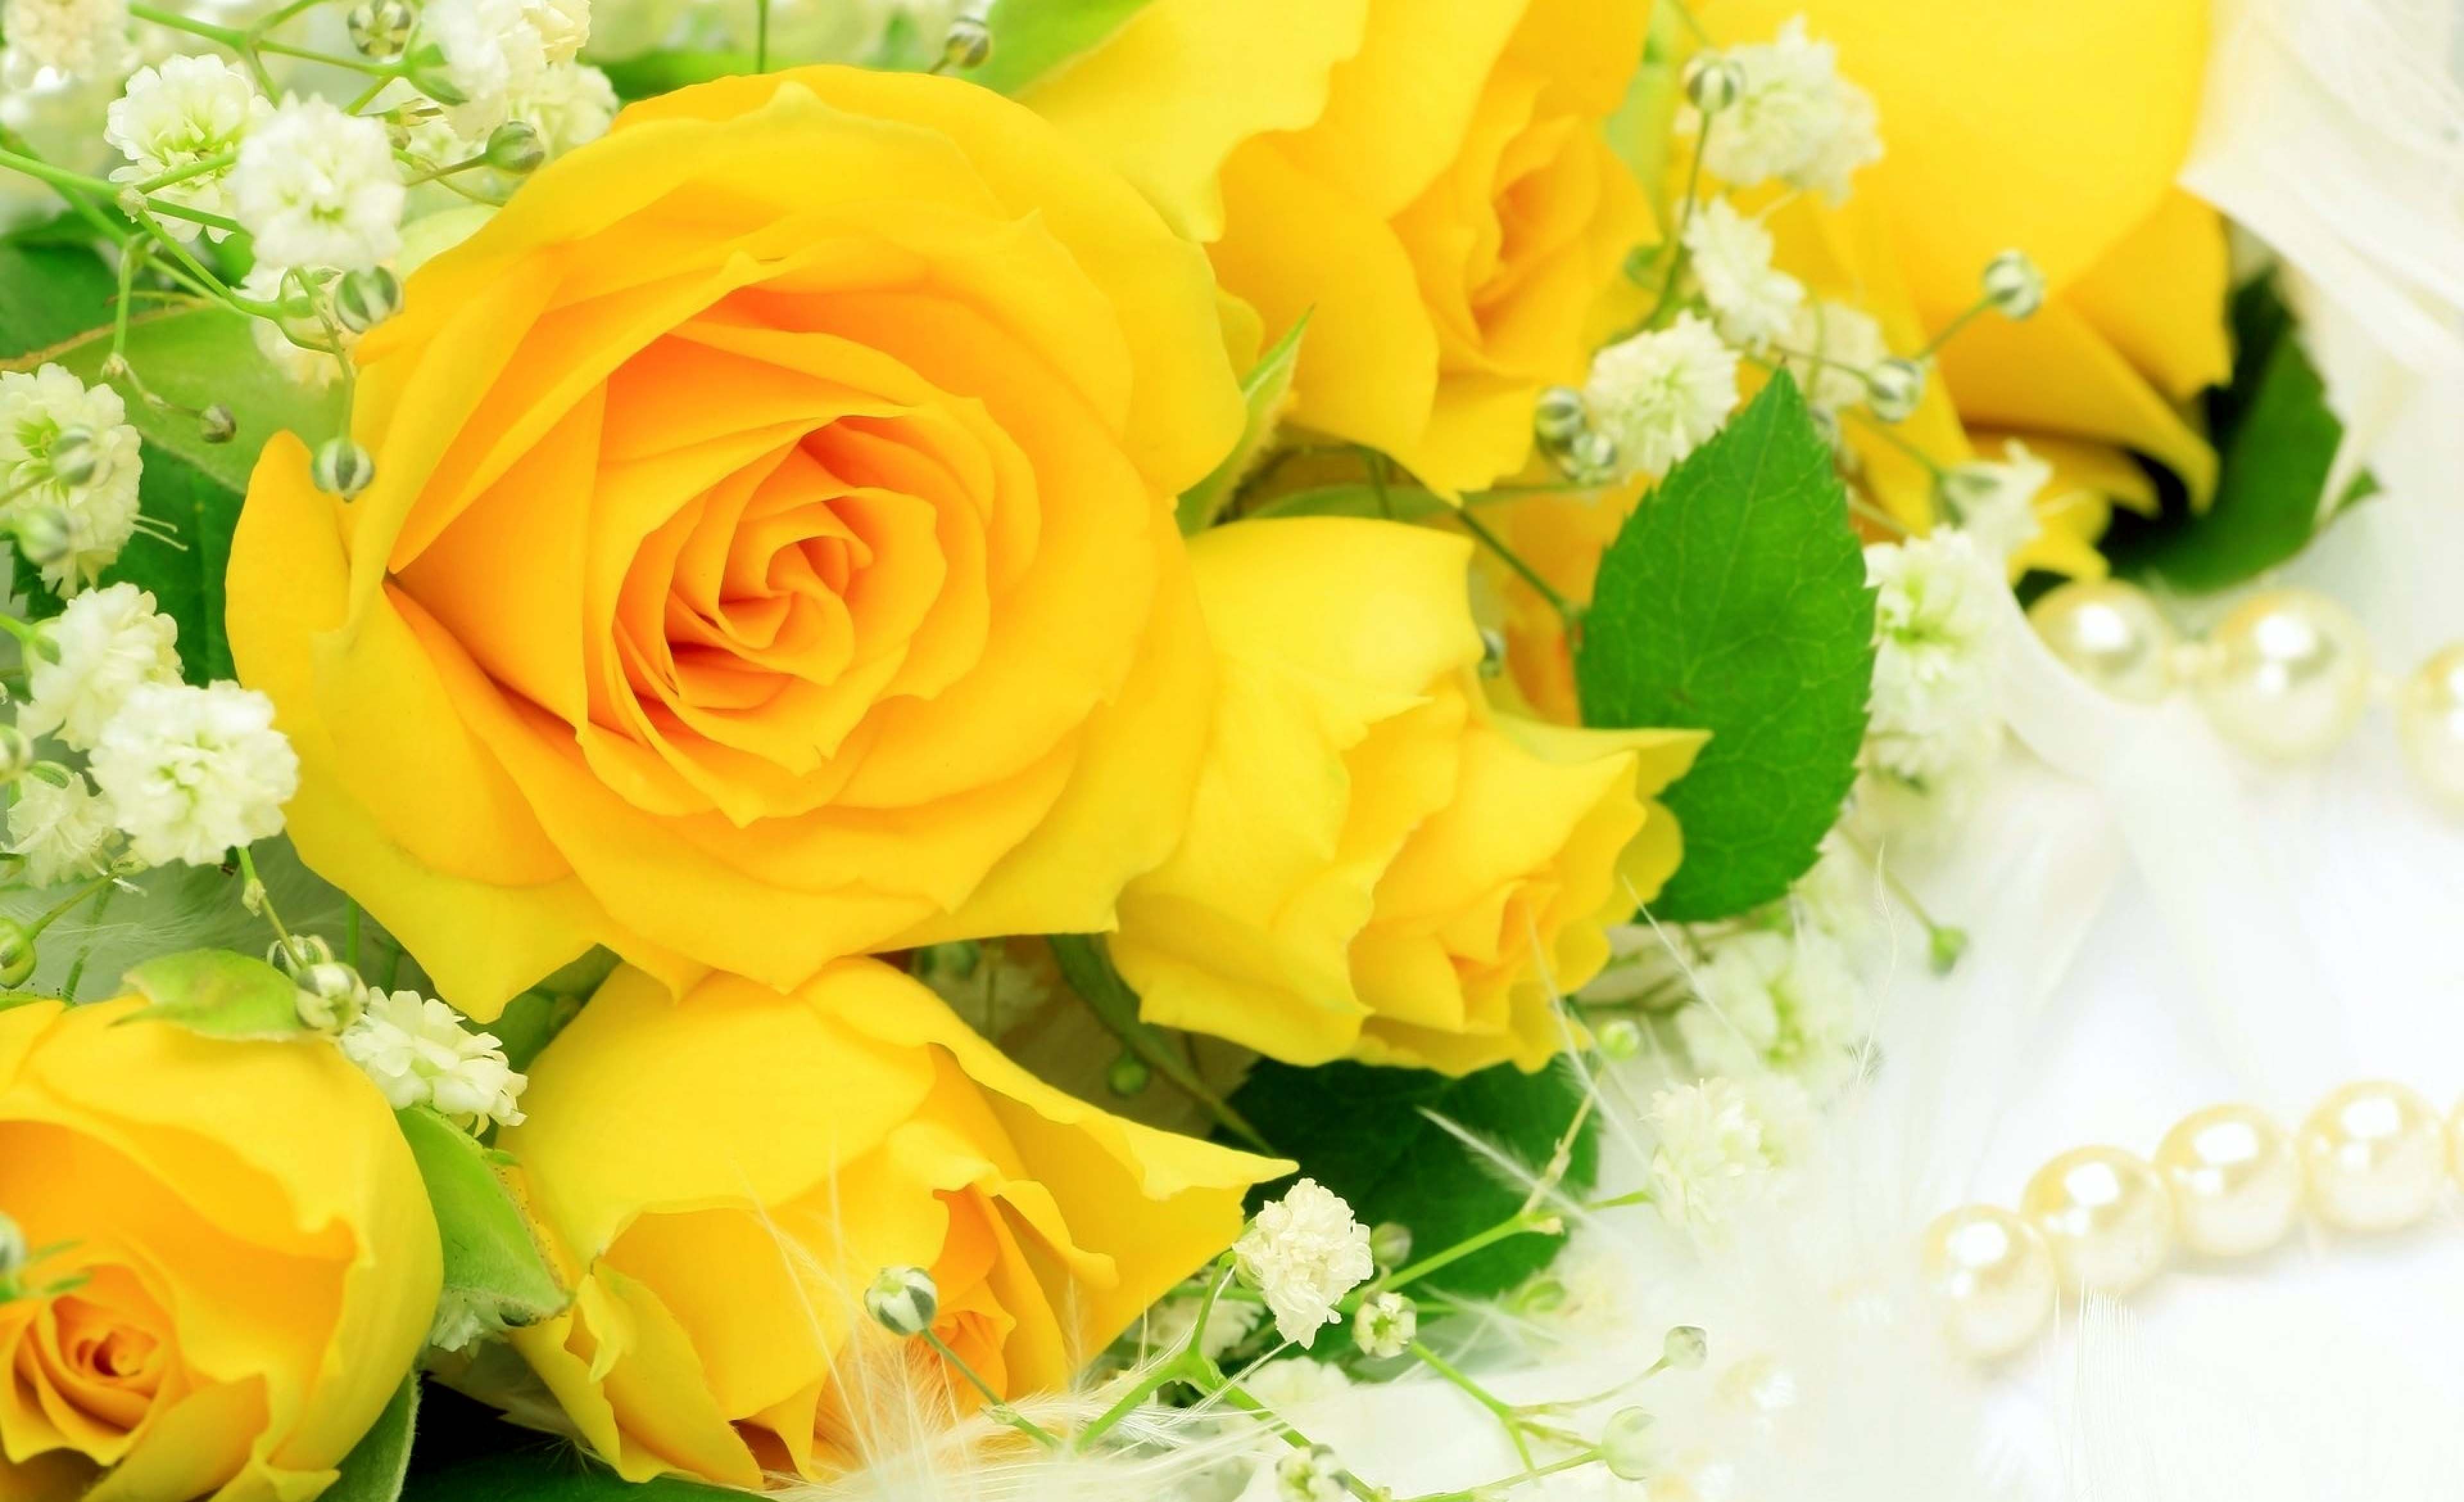 Download Free Download Stunning Yellow Roses Natural Beauty Images Hd Wallpapers 3840x2340 For Your Desktop Mobile Tablet Explore 77 Yellow Rose Flower Wallpaper Rose Flowers Wallpapers Free Download Yellow Flowers